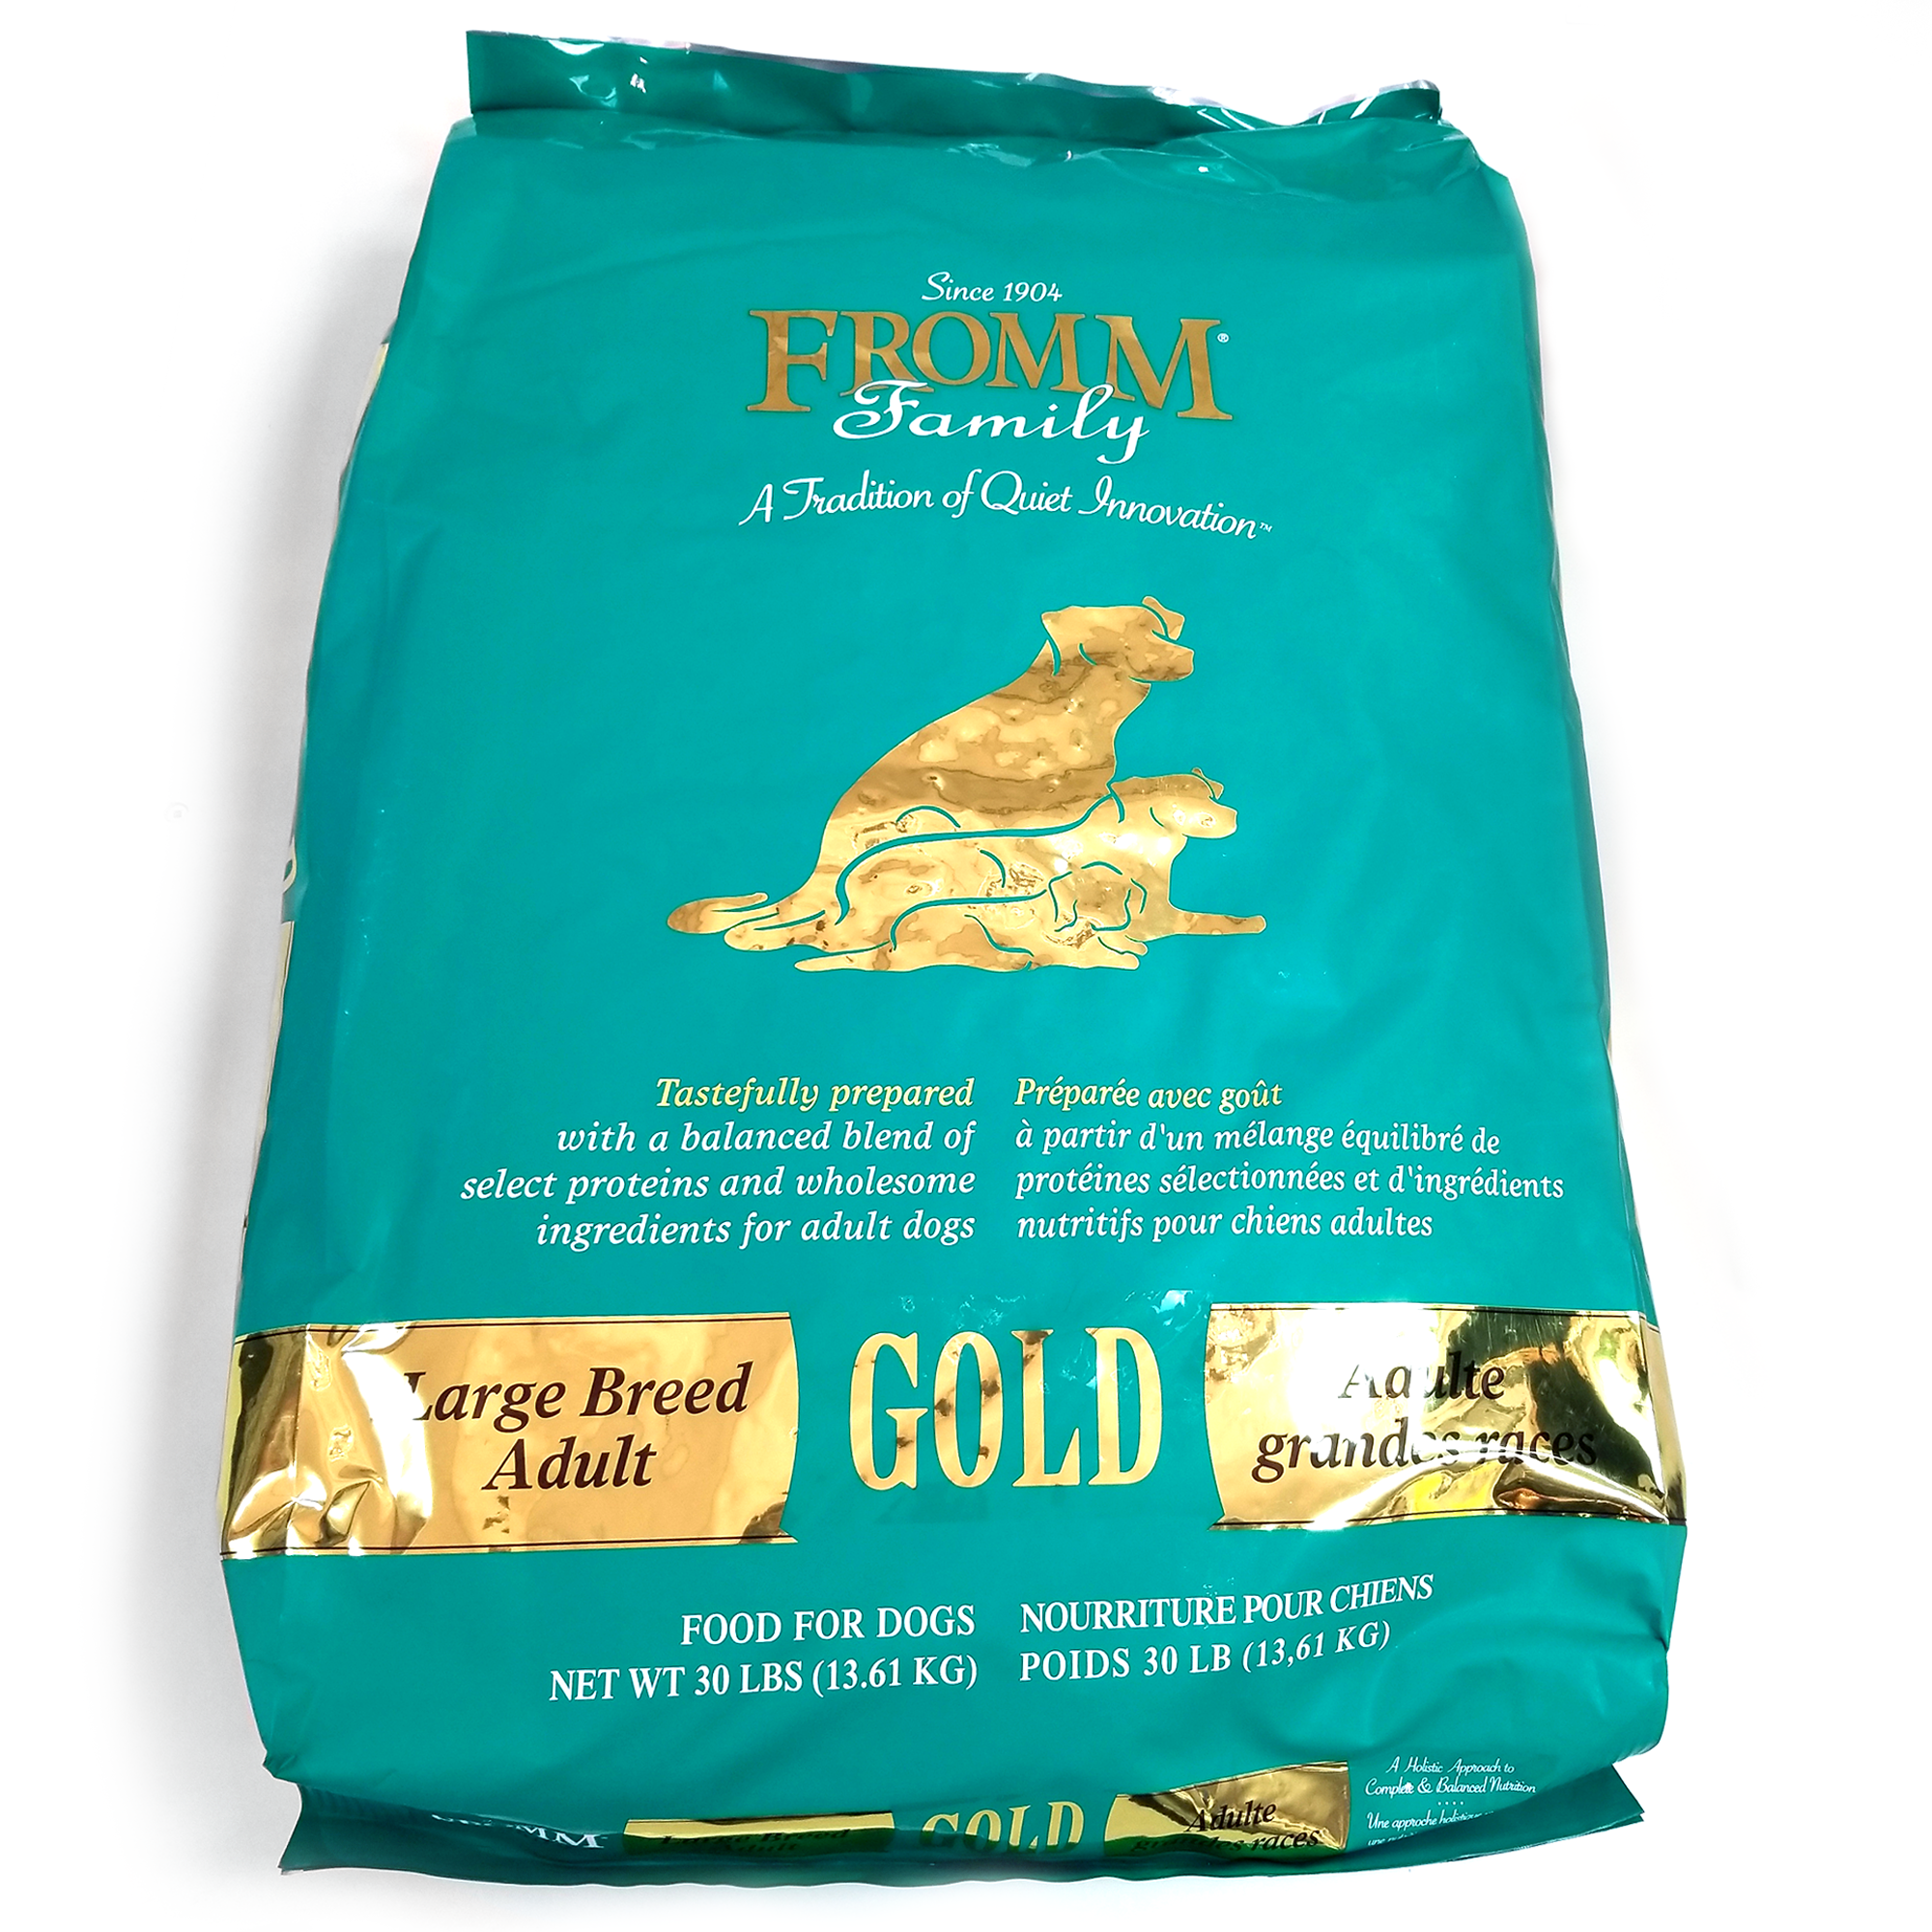 Fromm Gold Dog Food, Large Breed, Adult, 30lb